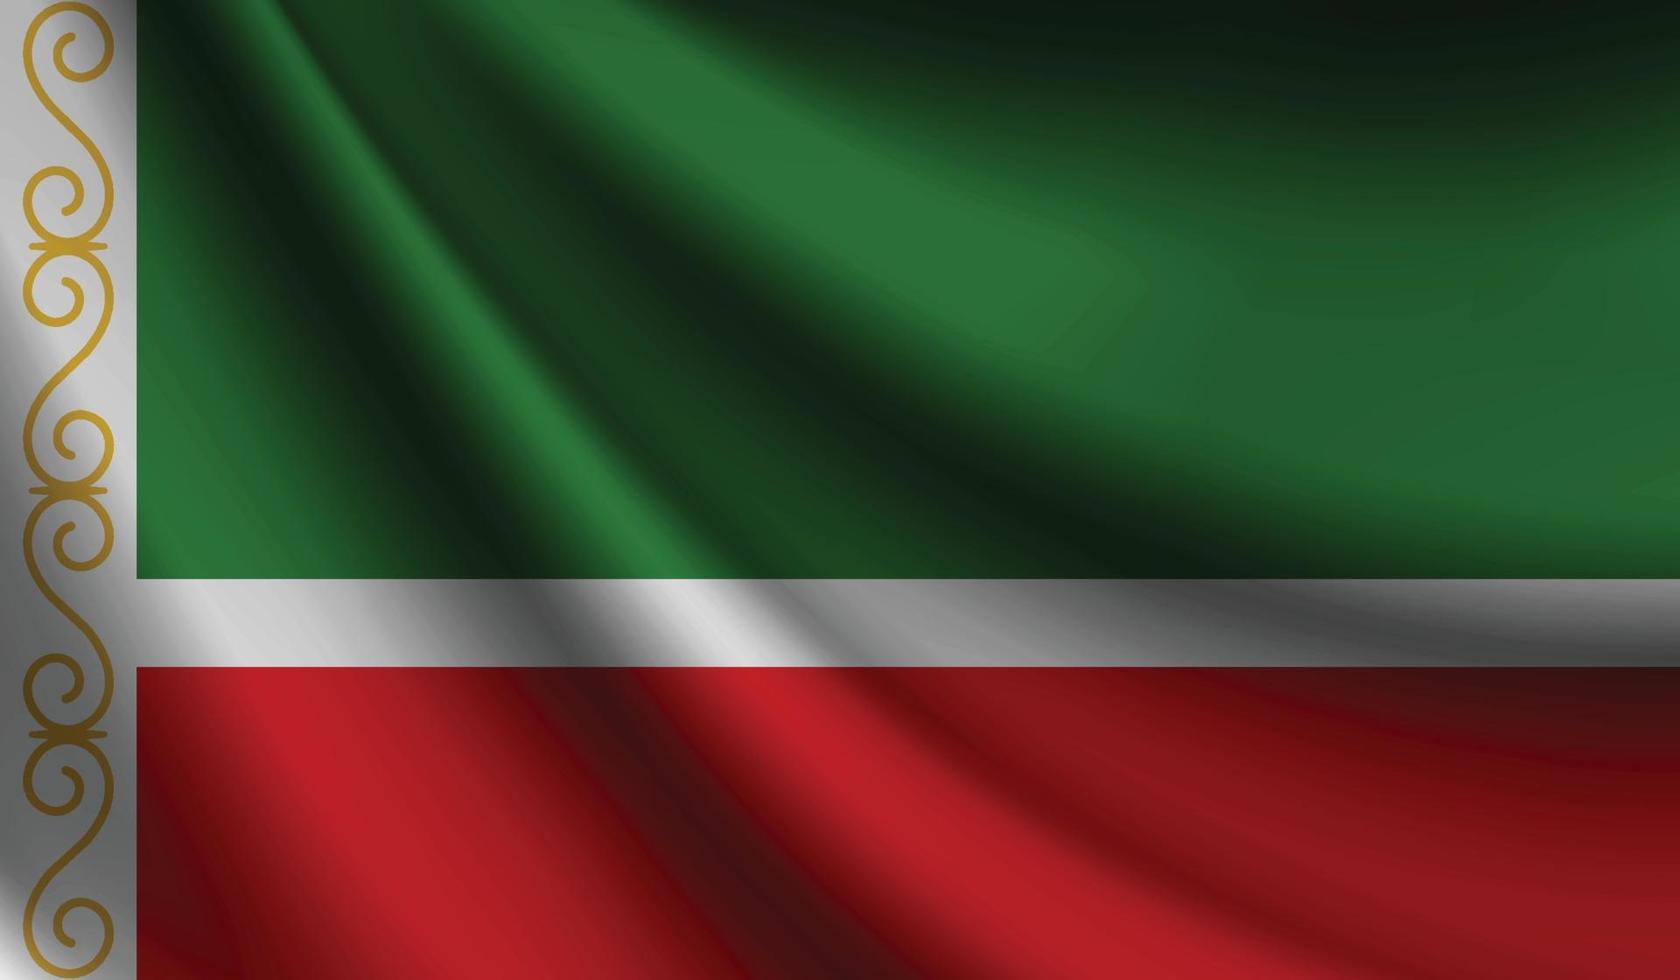 chechen republic flag waving. Background for patriotic and national design vector